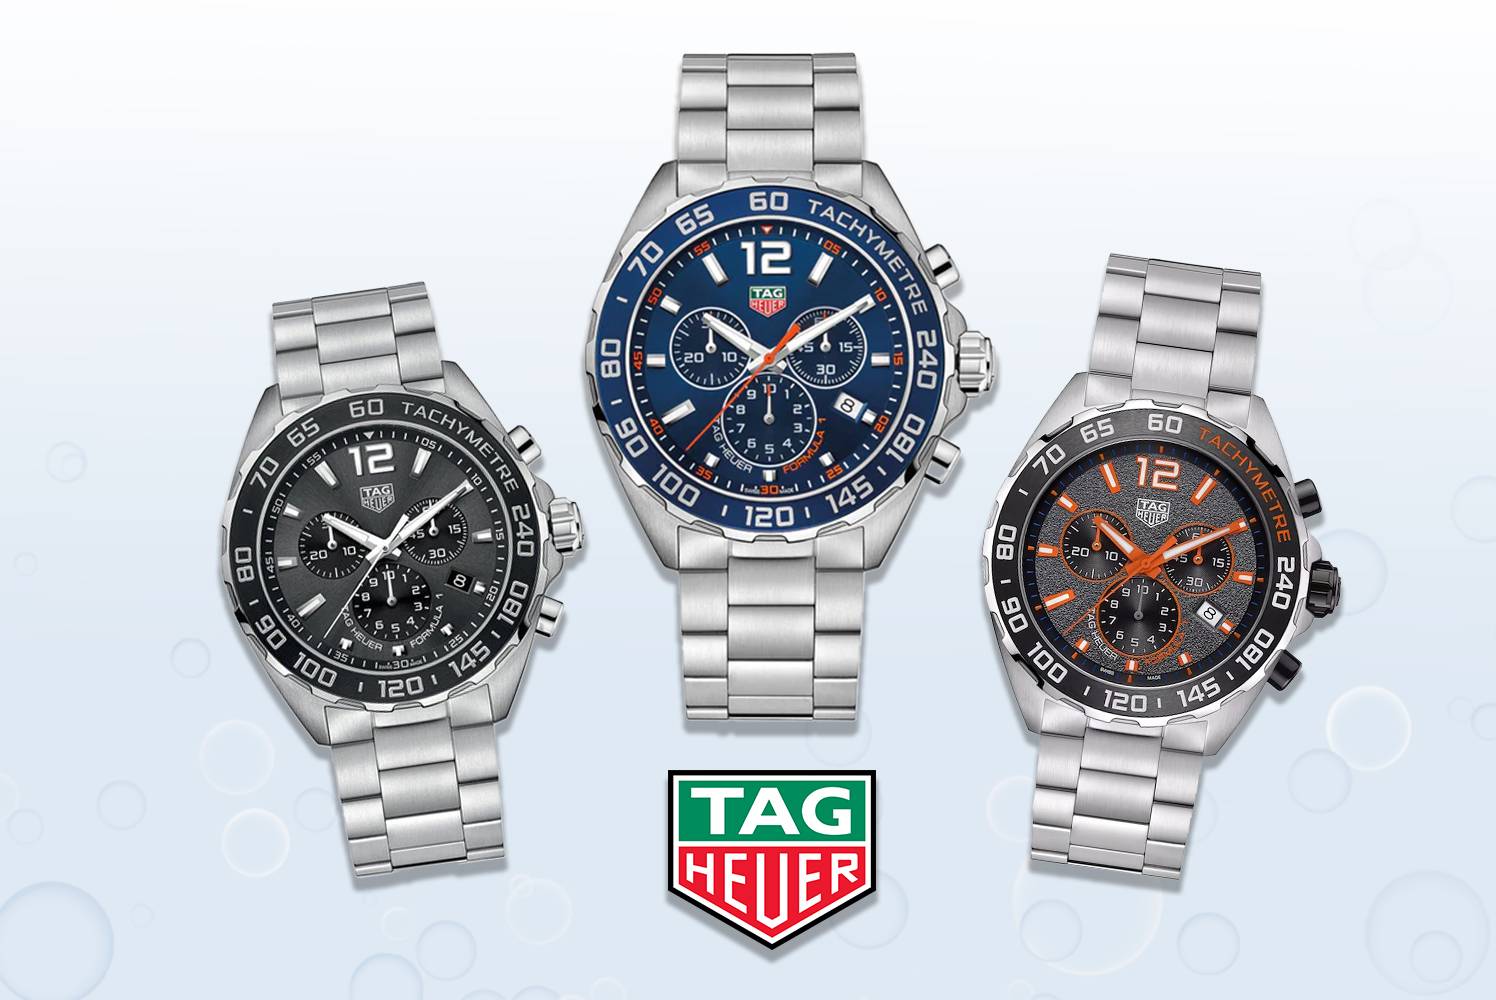 Win your Choice of Tag Heuer Watch